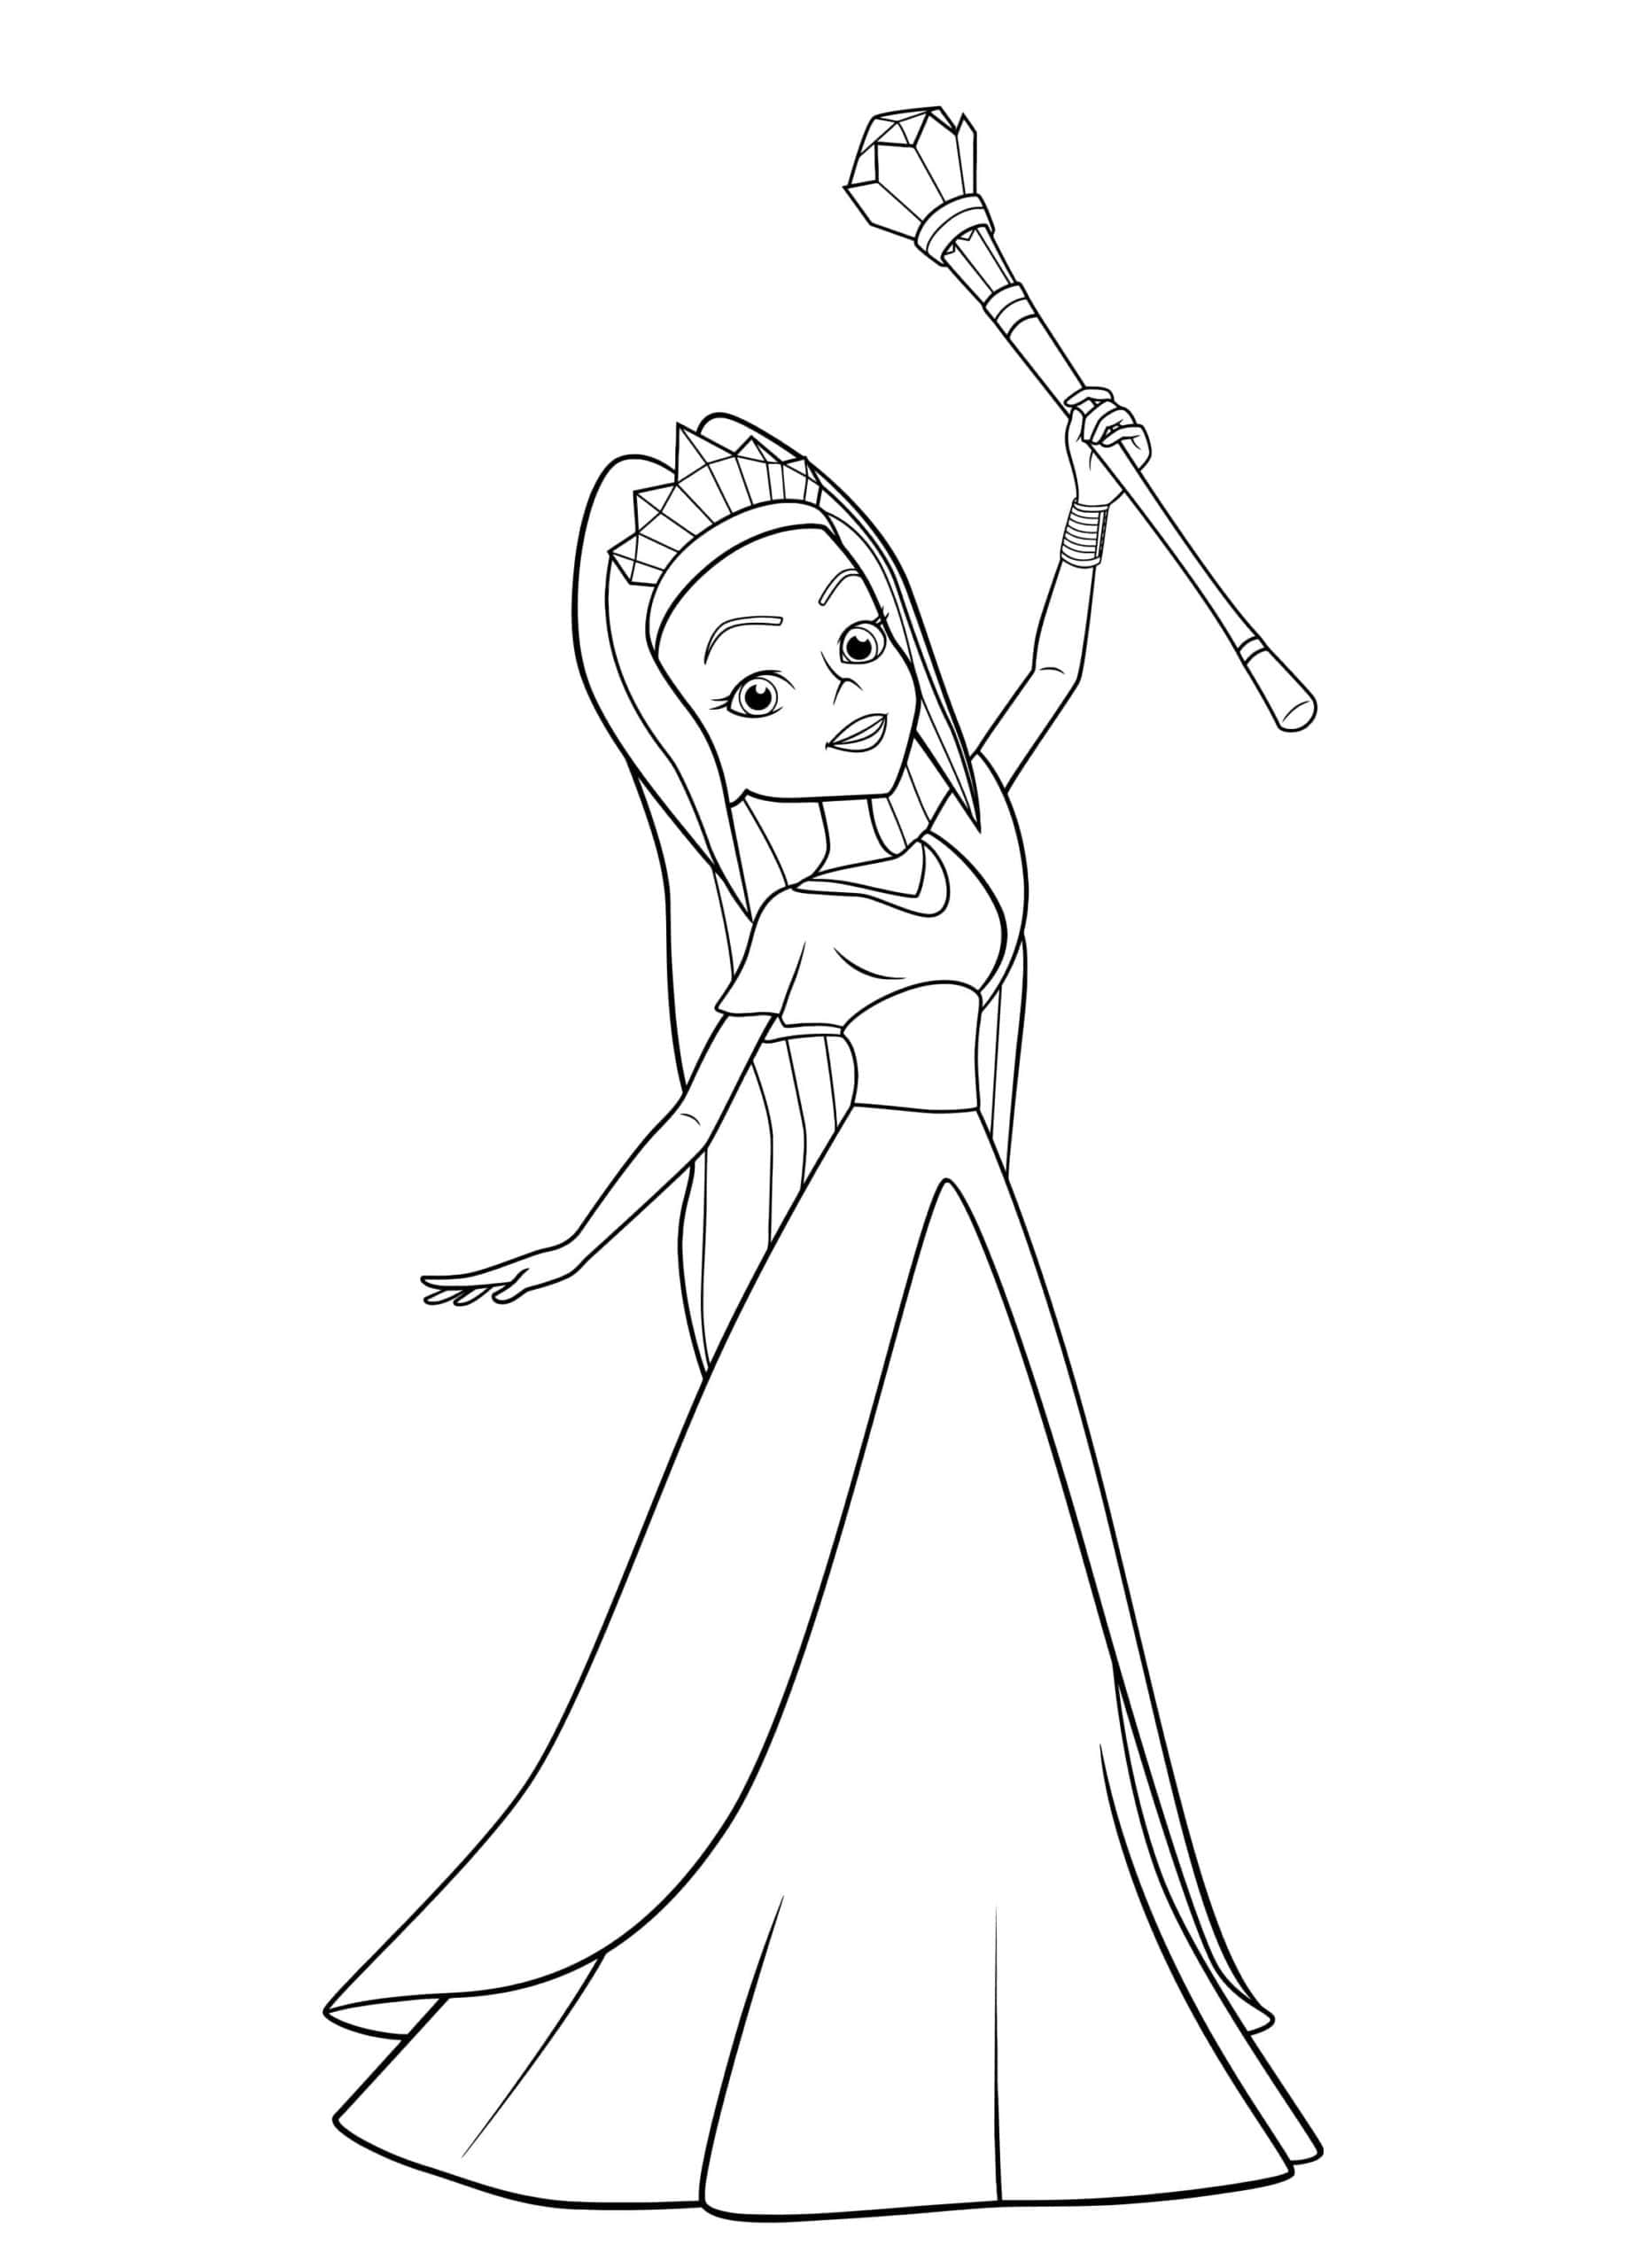 Rainbow Rangers coloring pages download for kids